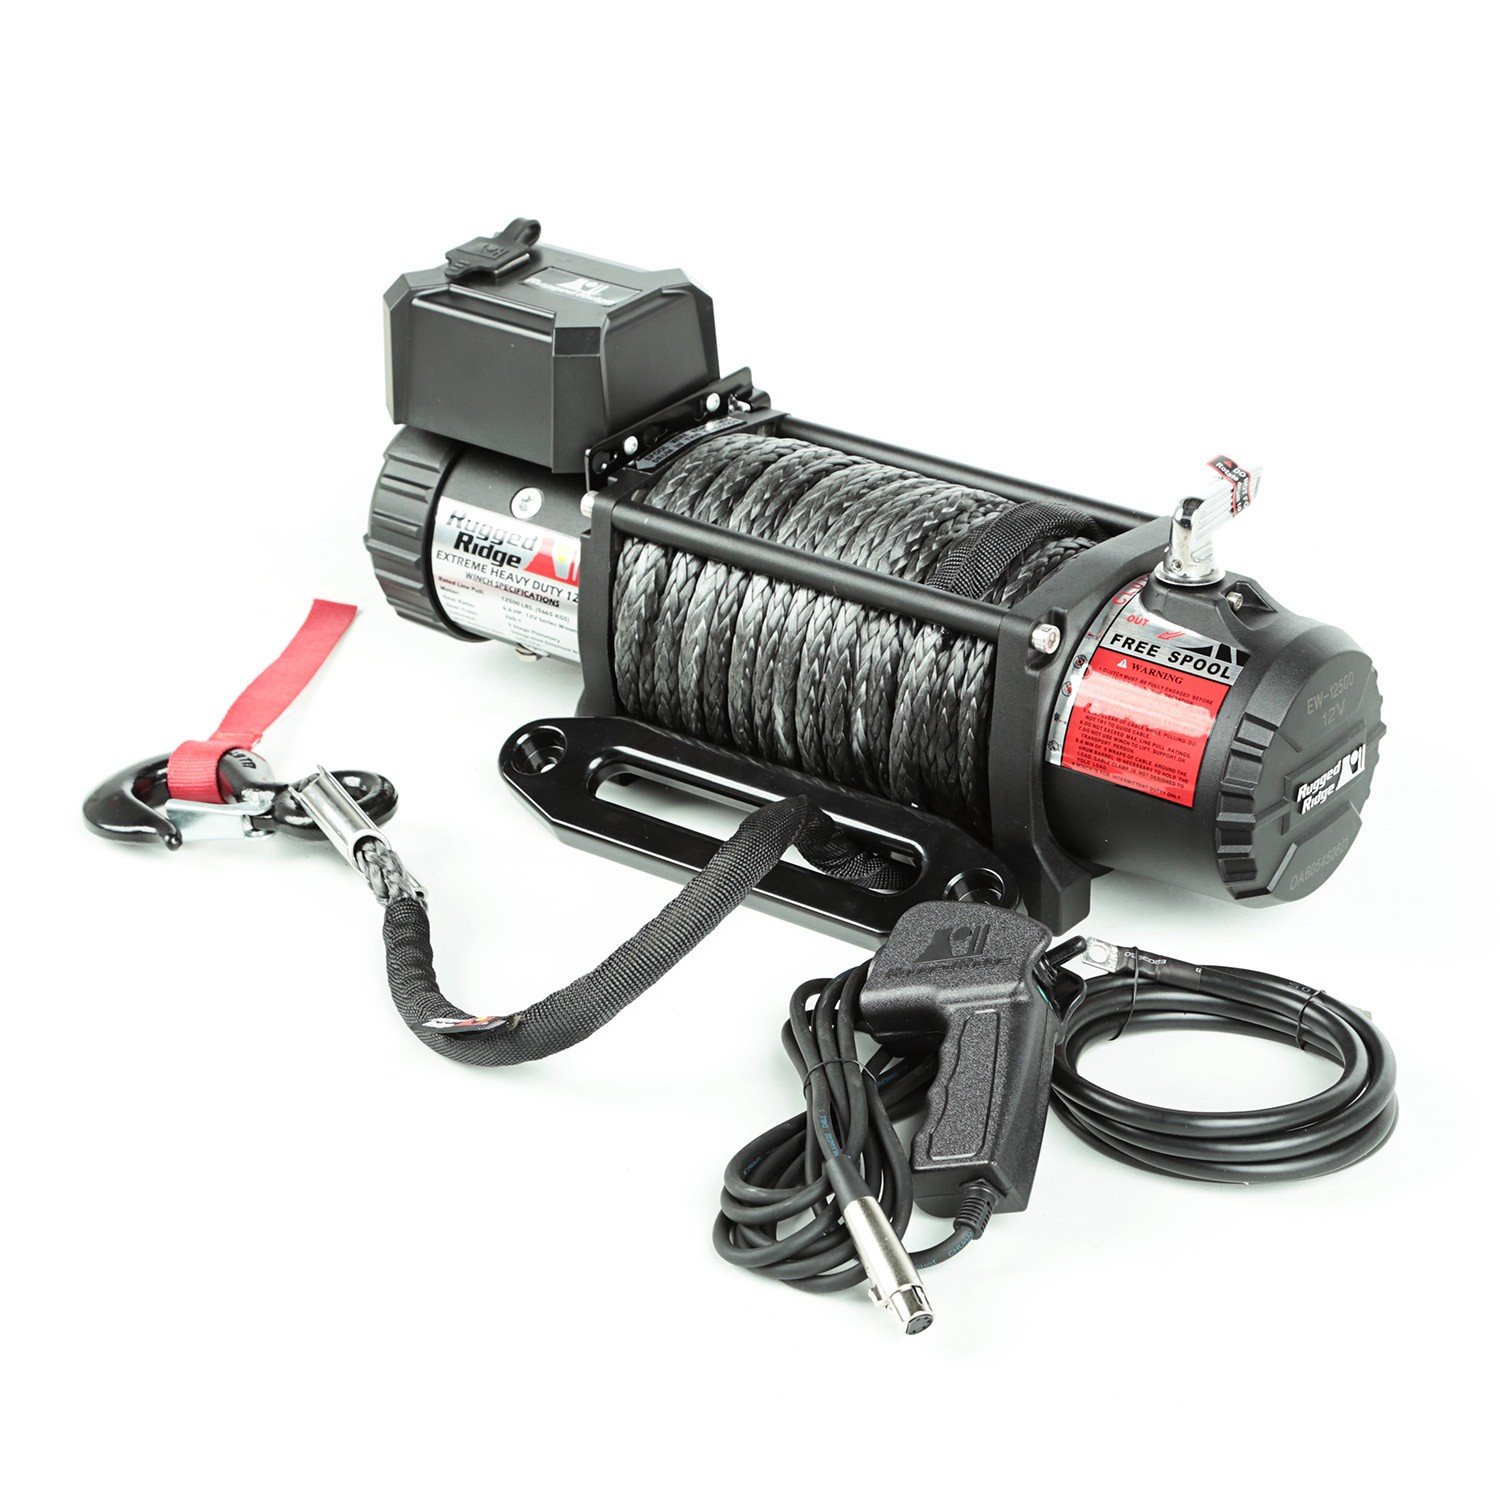 Heavy Duty Nautic 12,500 Lb. Rated Waterproof Winch with Synthetic Rope